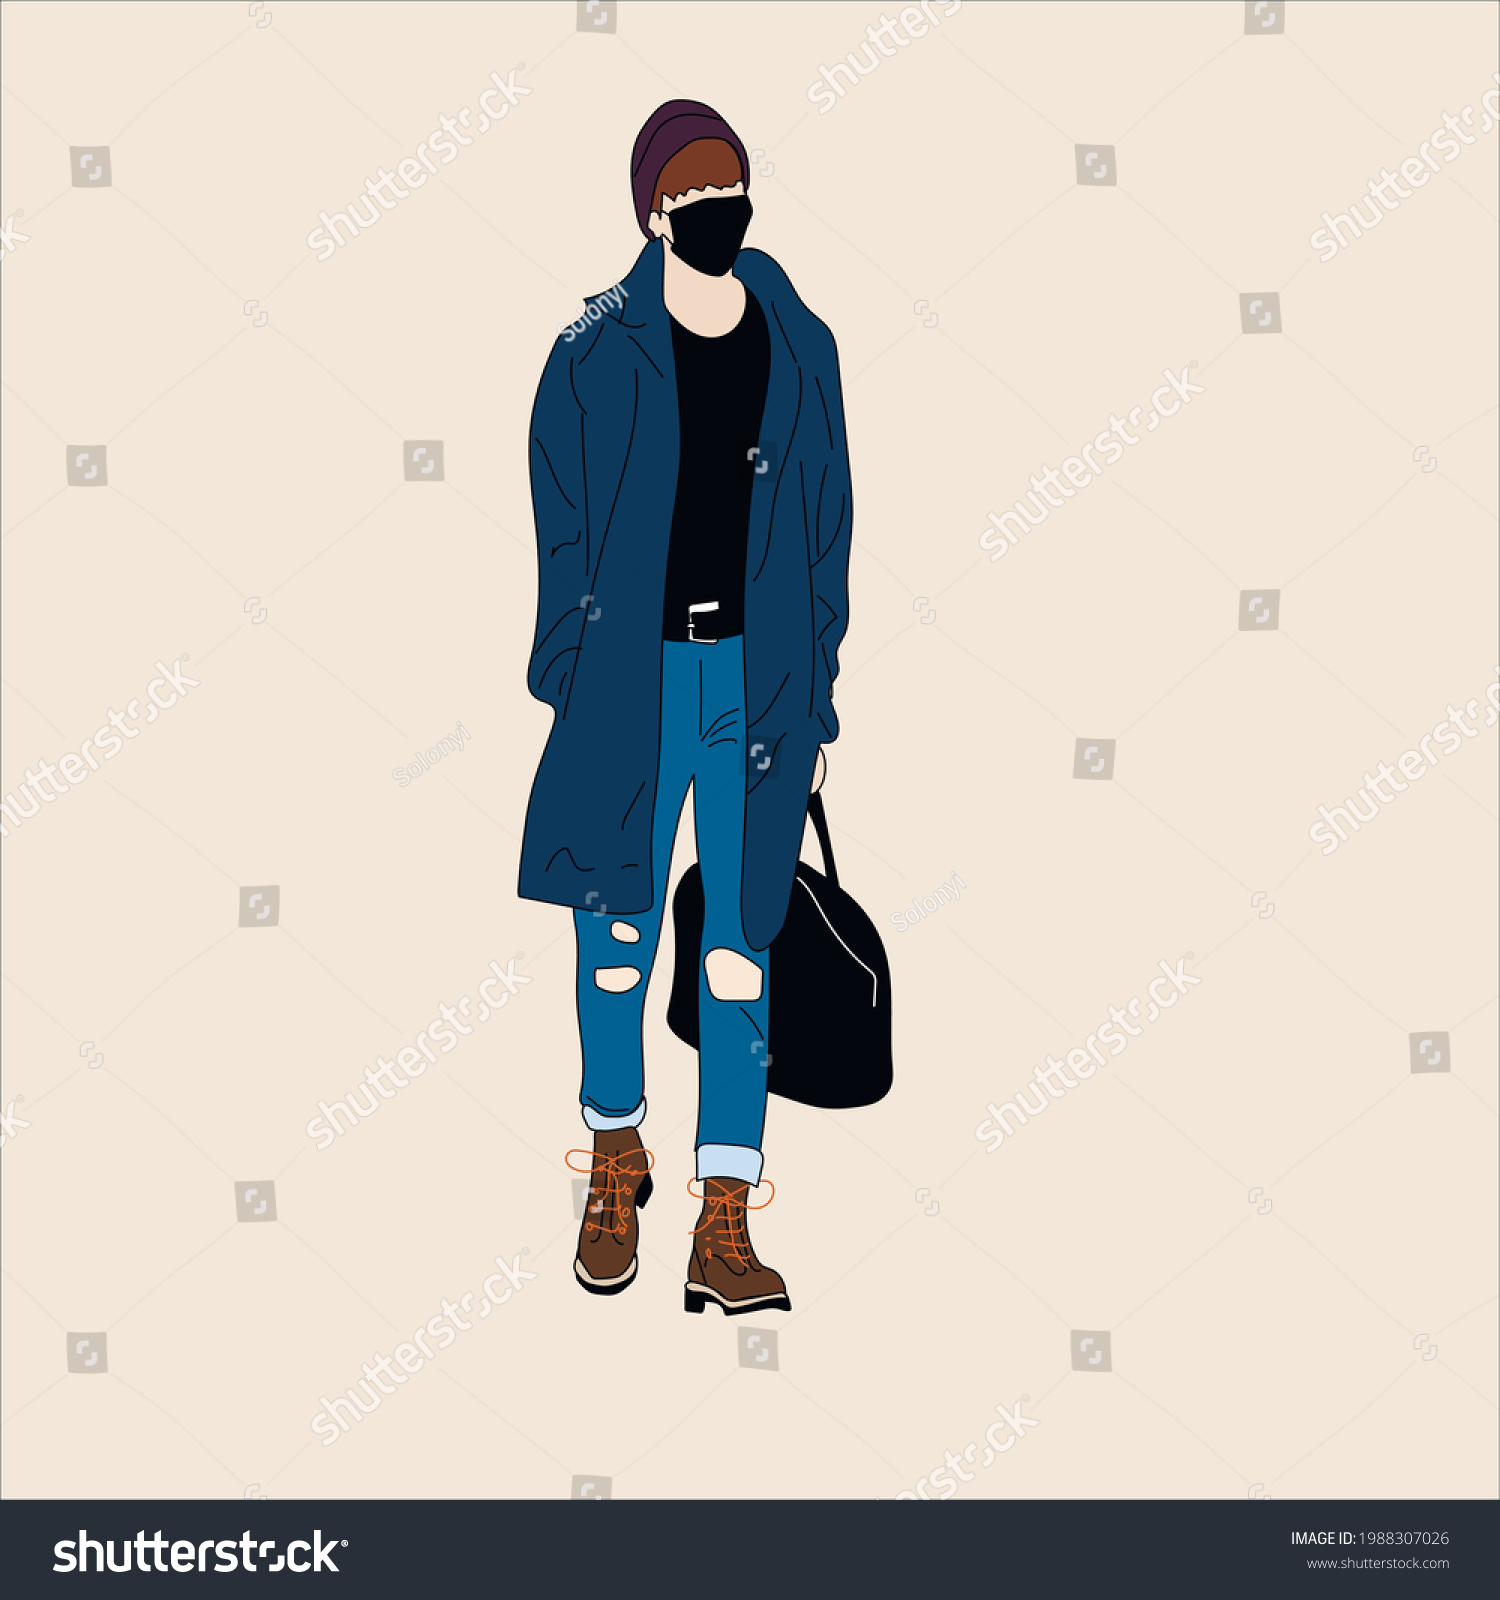 SVG of Vector illustration of Kpop street fashion. Street idols of Koreans. Kpop men's fashion idol. A guy in blue jeans and a raincoat and boots with a black bag and a mask on his face. svg